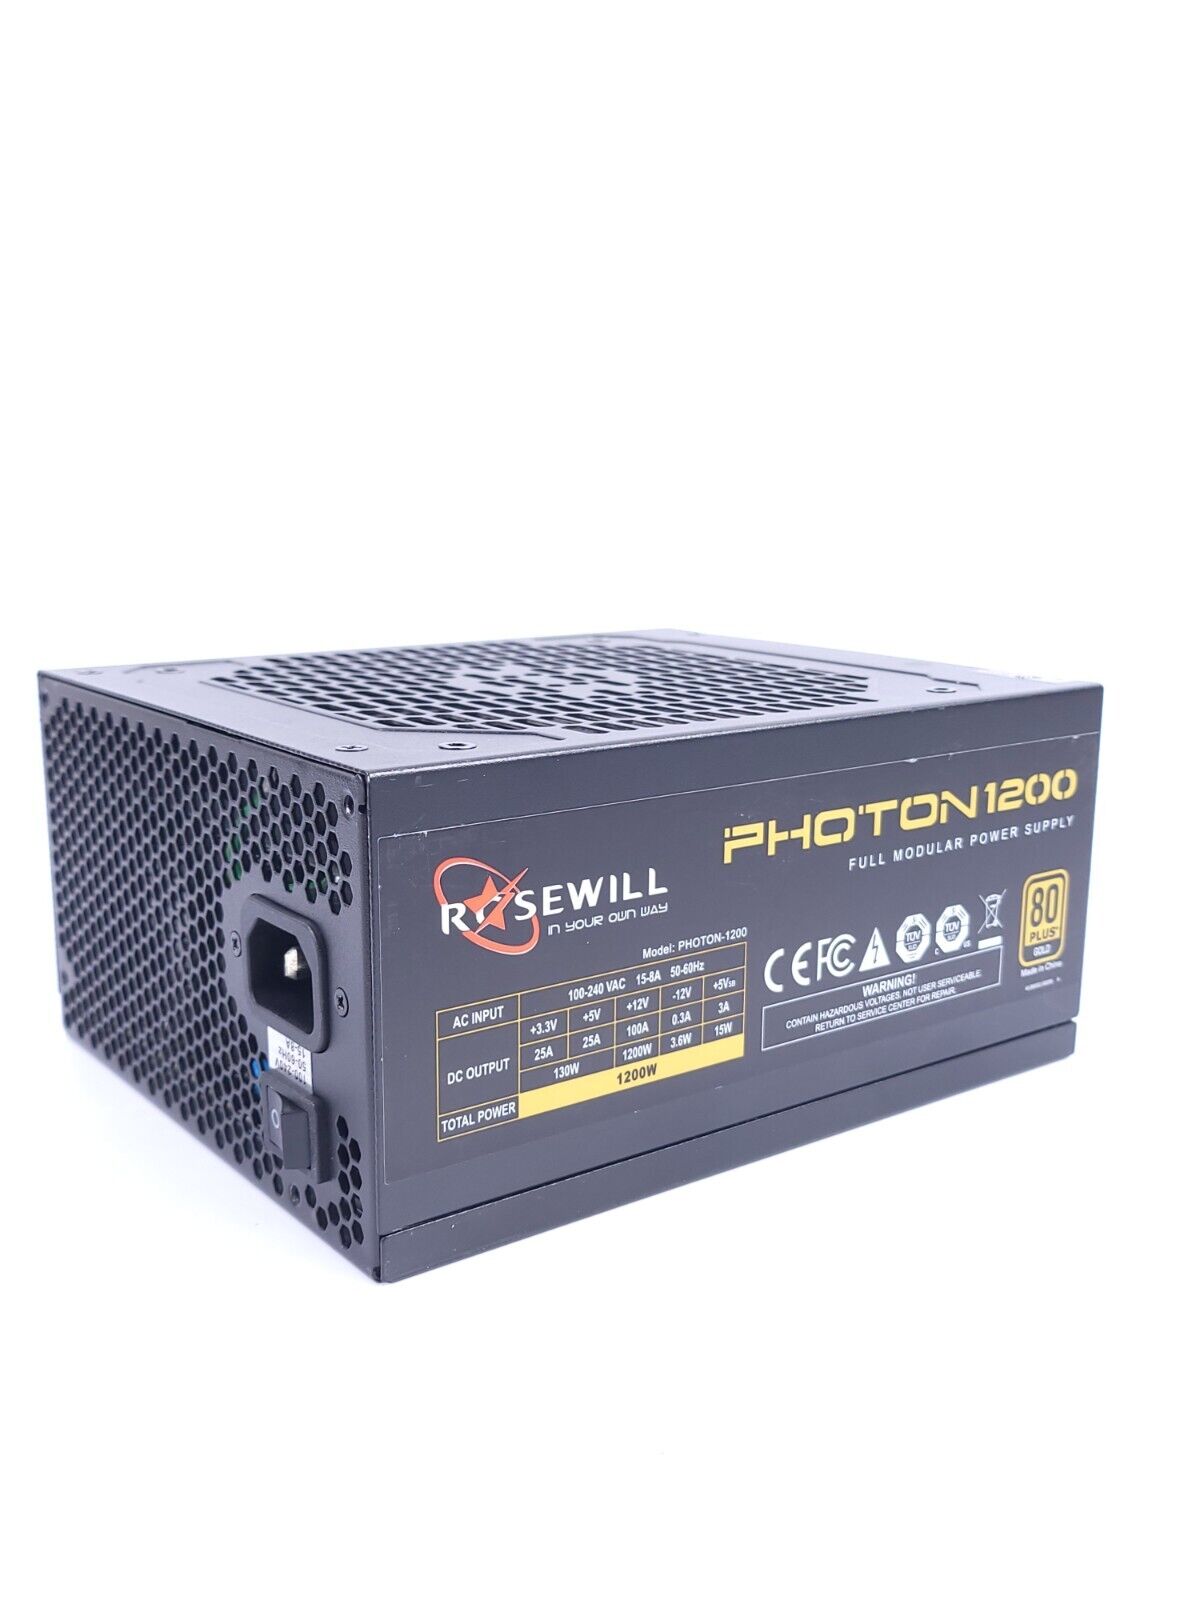 As Is No Power - Rosewill PHOTON-1200 1200 Watt 80 Plus Gold Gaming Power Supply